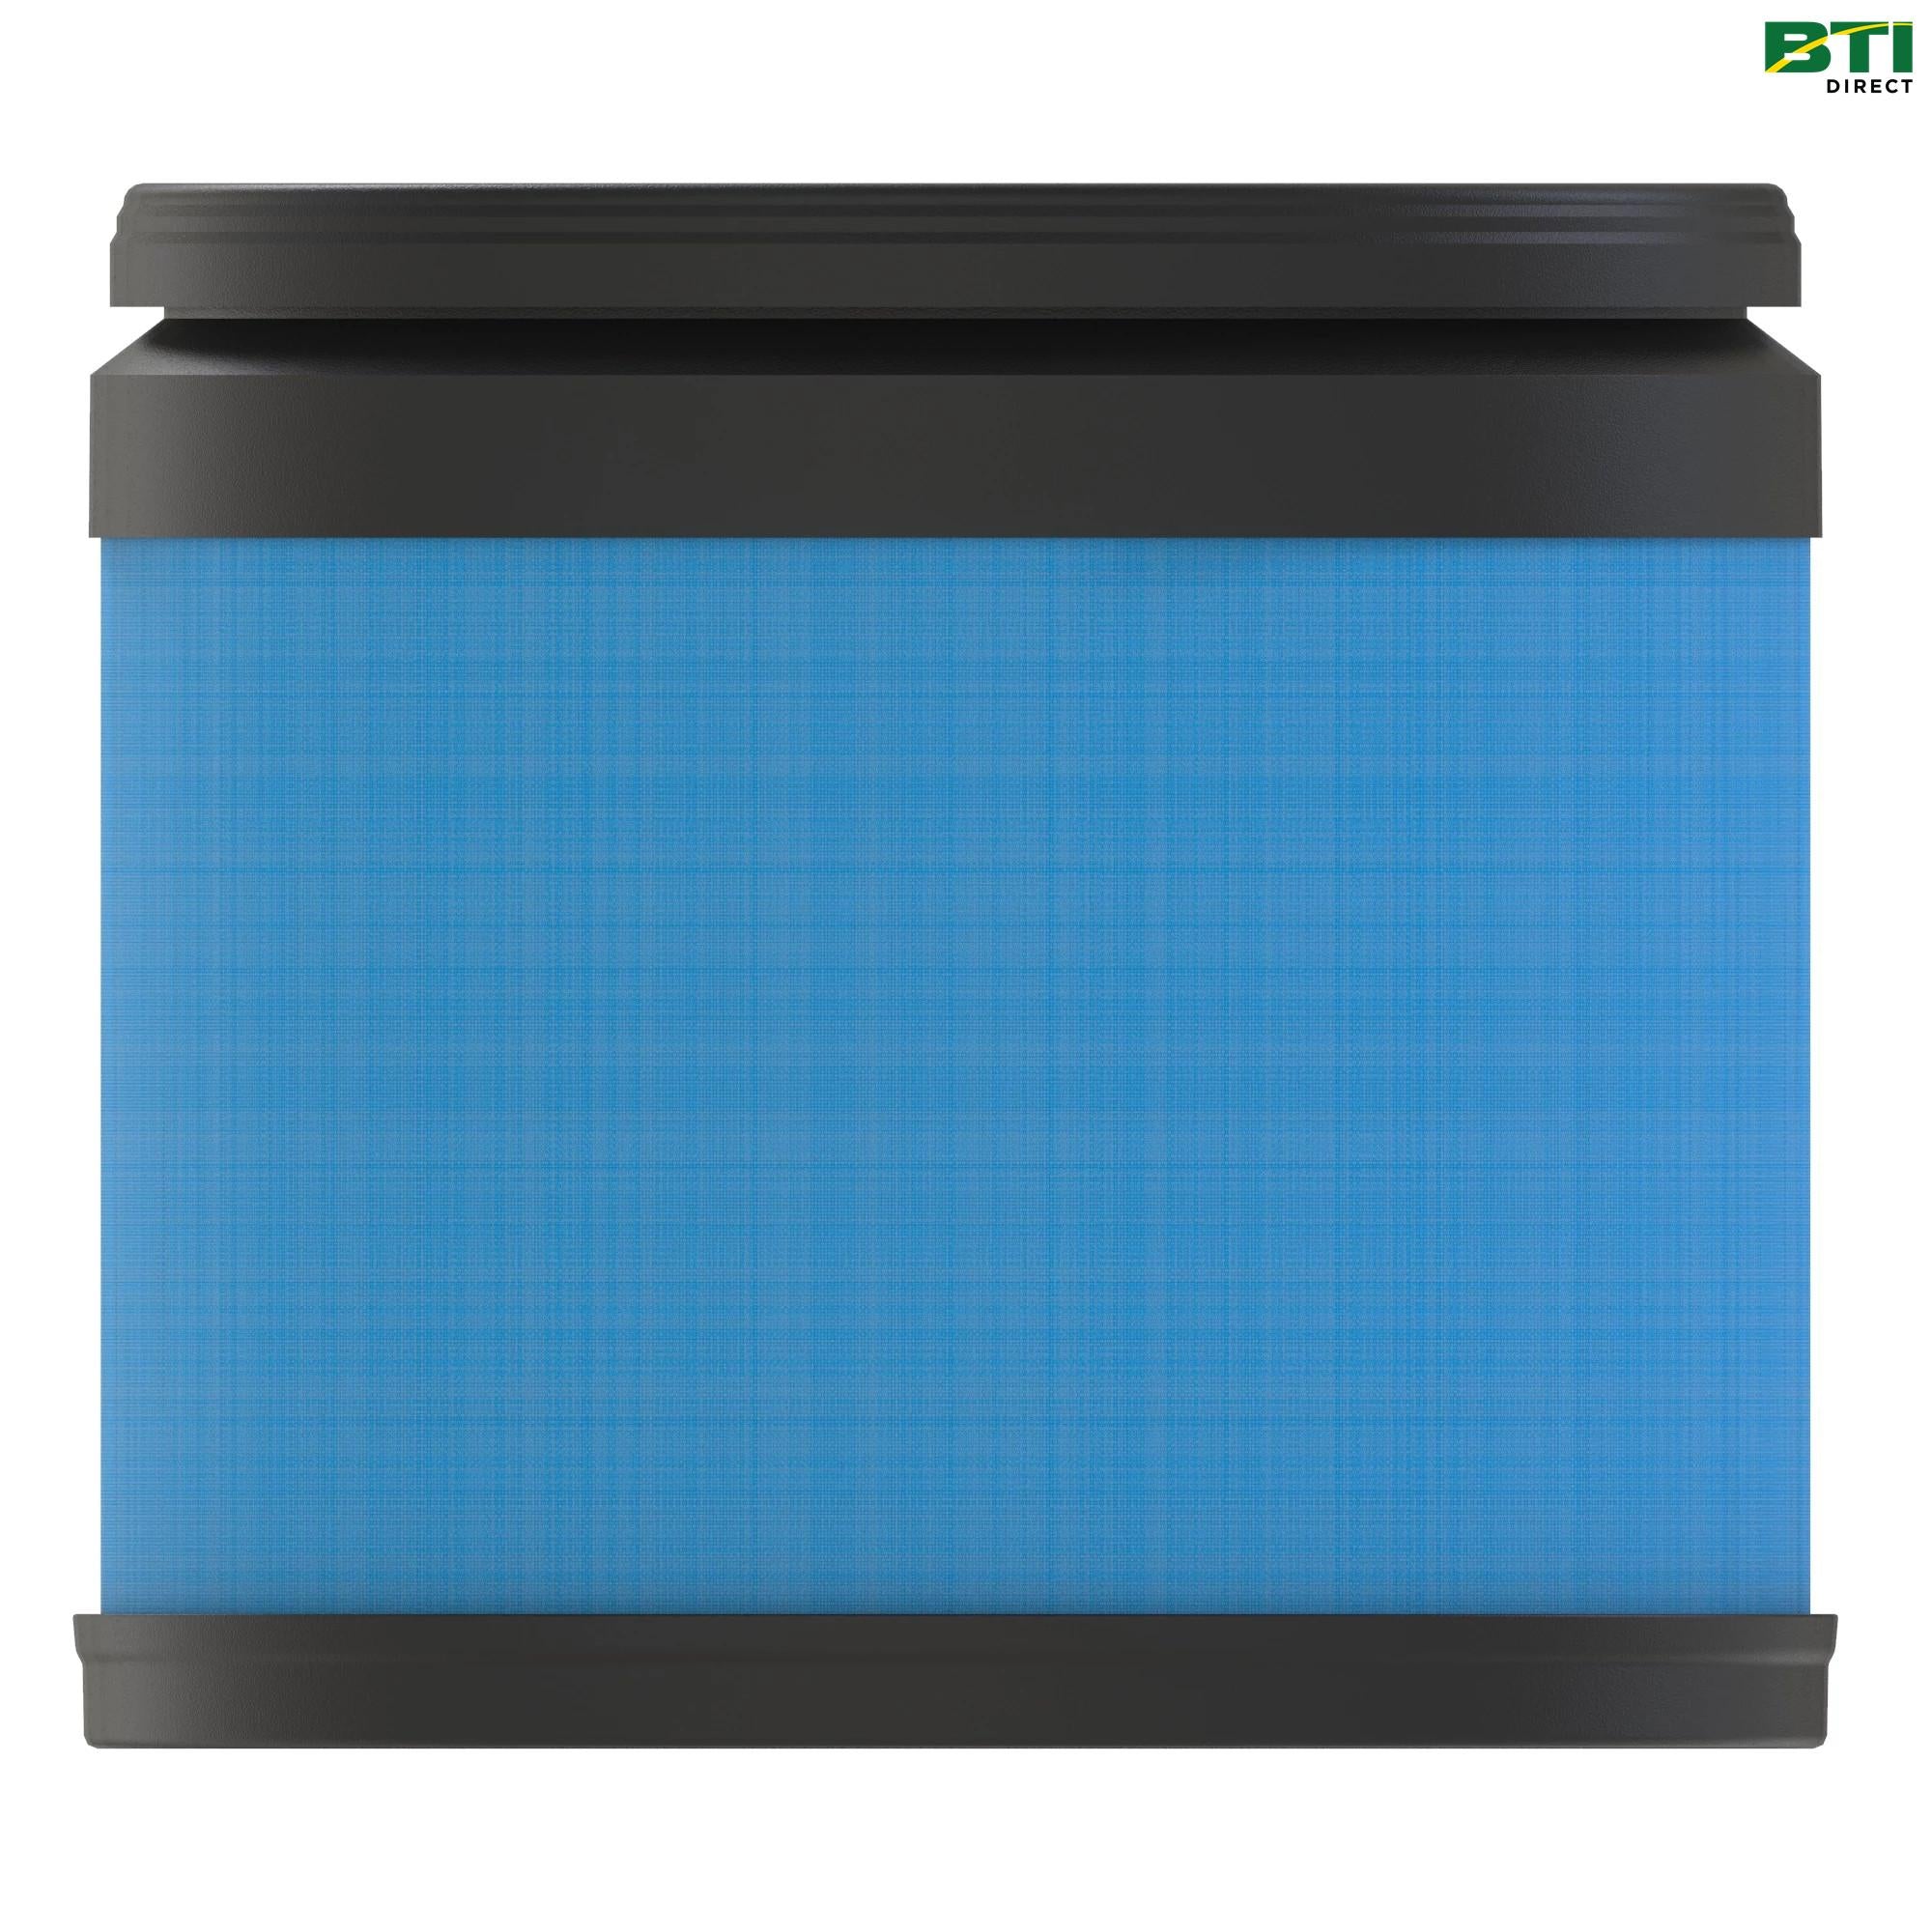 RE196945: Primary Air Filter Element